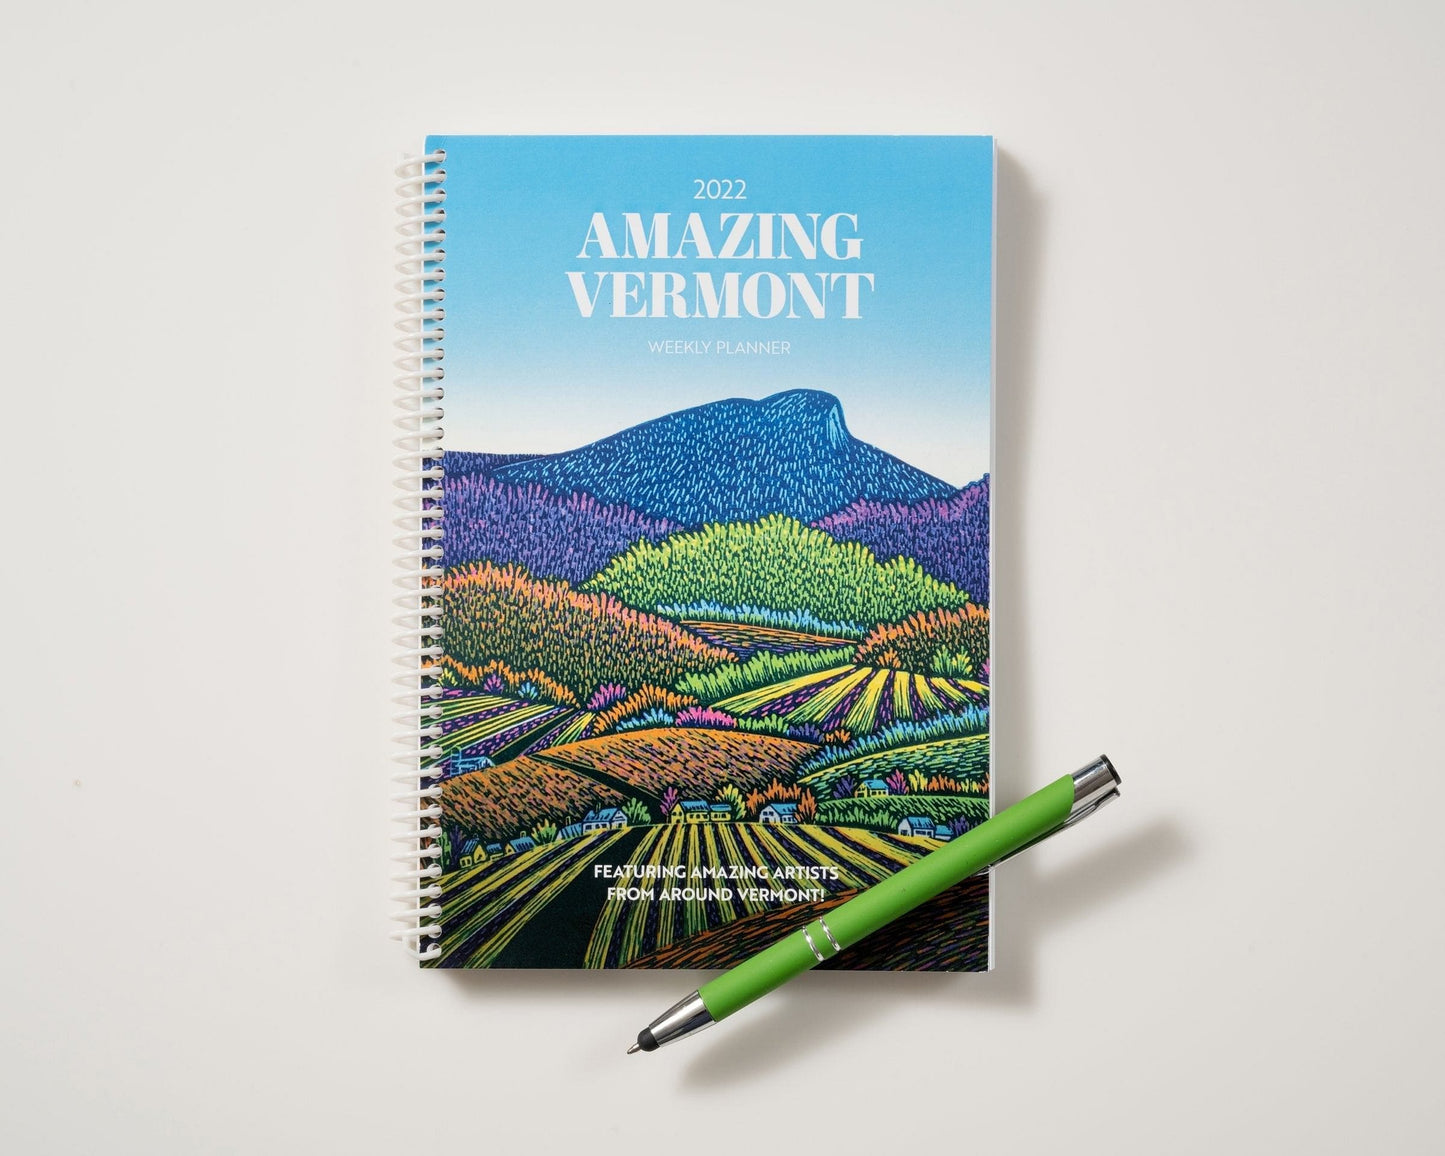 2022 Amazing Vermont - Weekly Planner Book - Shelburne Country Store